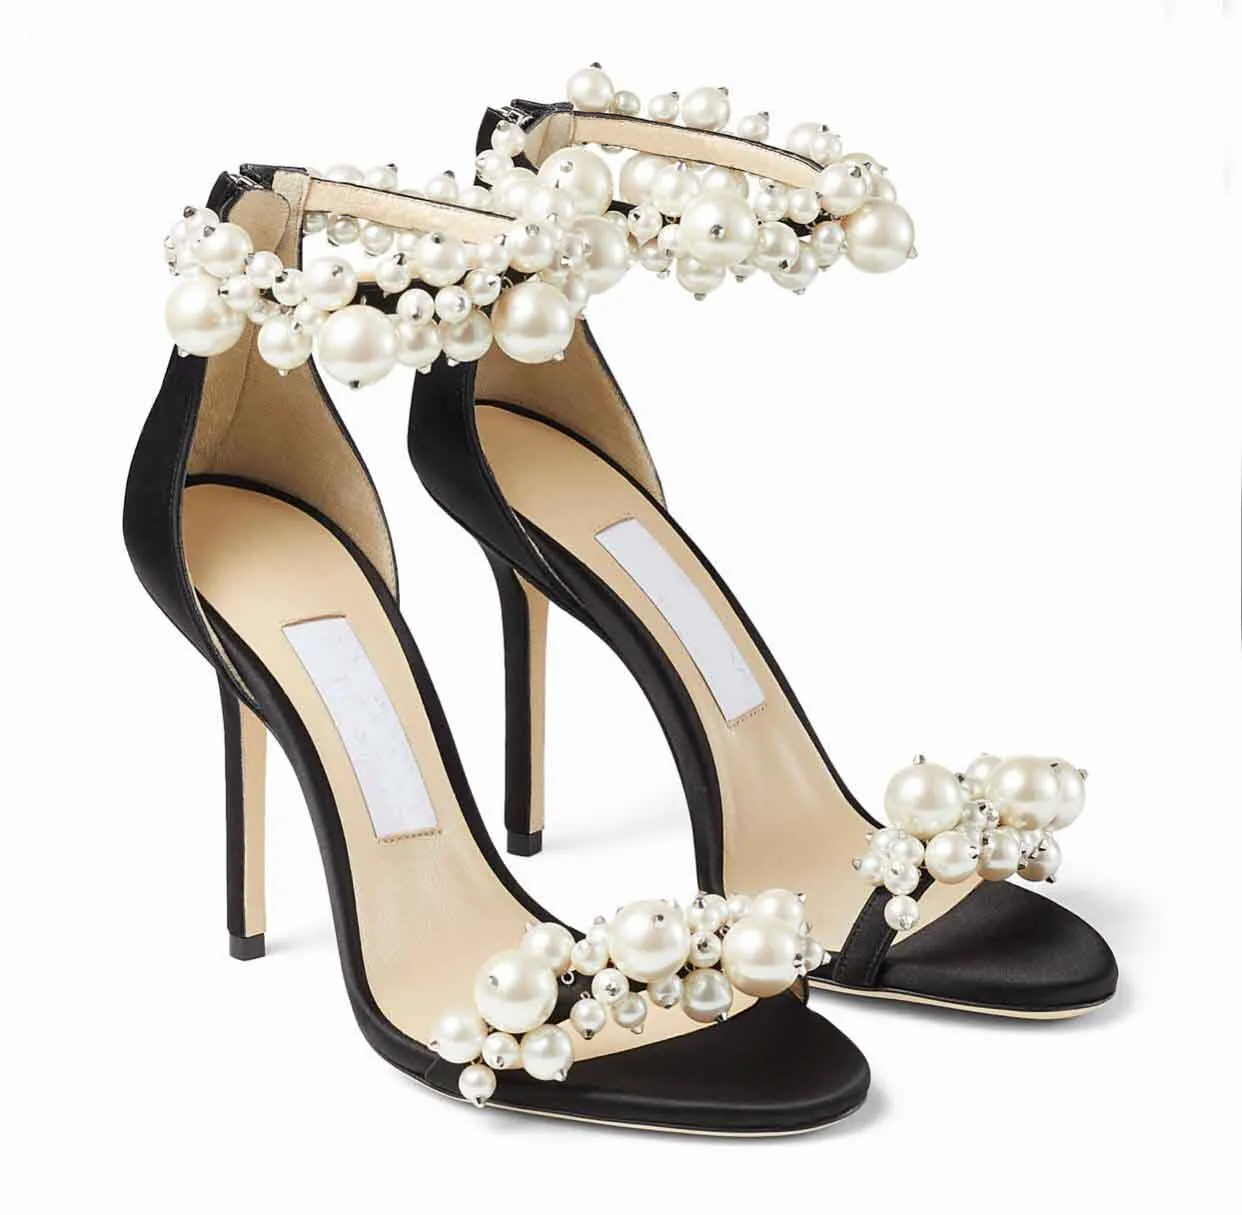 Bridal shoes: Walk tall with our pick of glamour heels